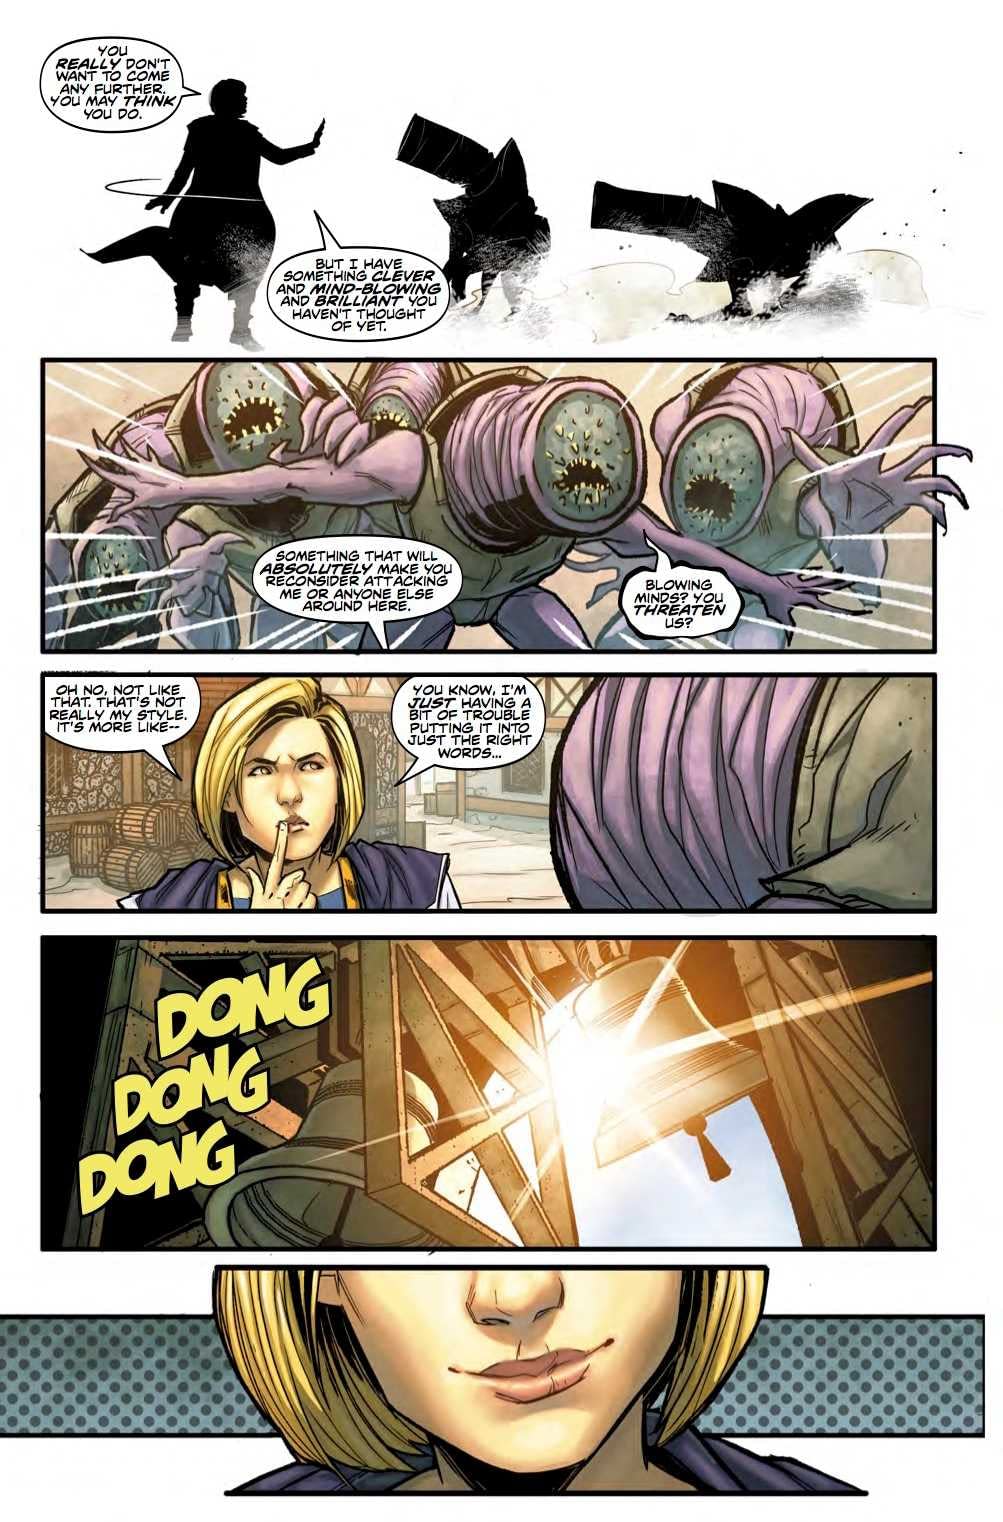 The Doctor is Still Winging it in Next Week's Doctor Who #6